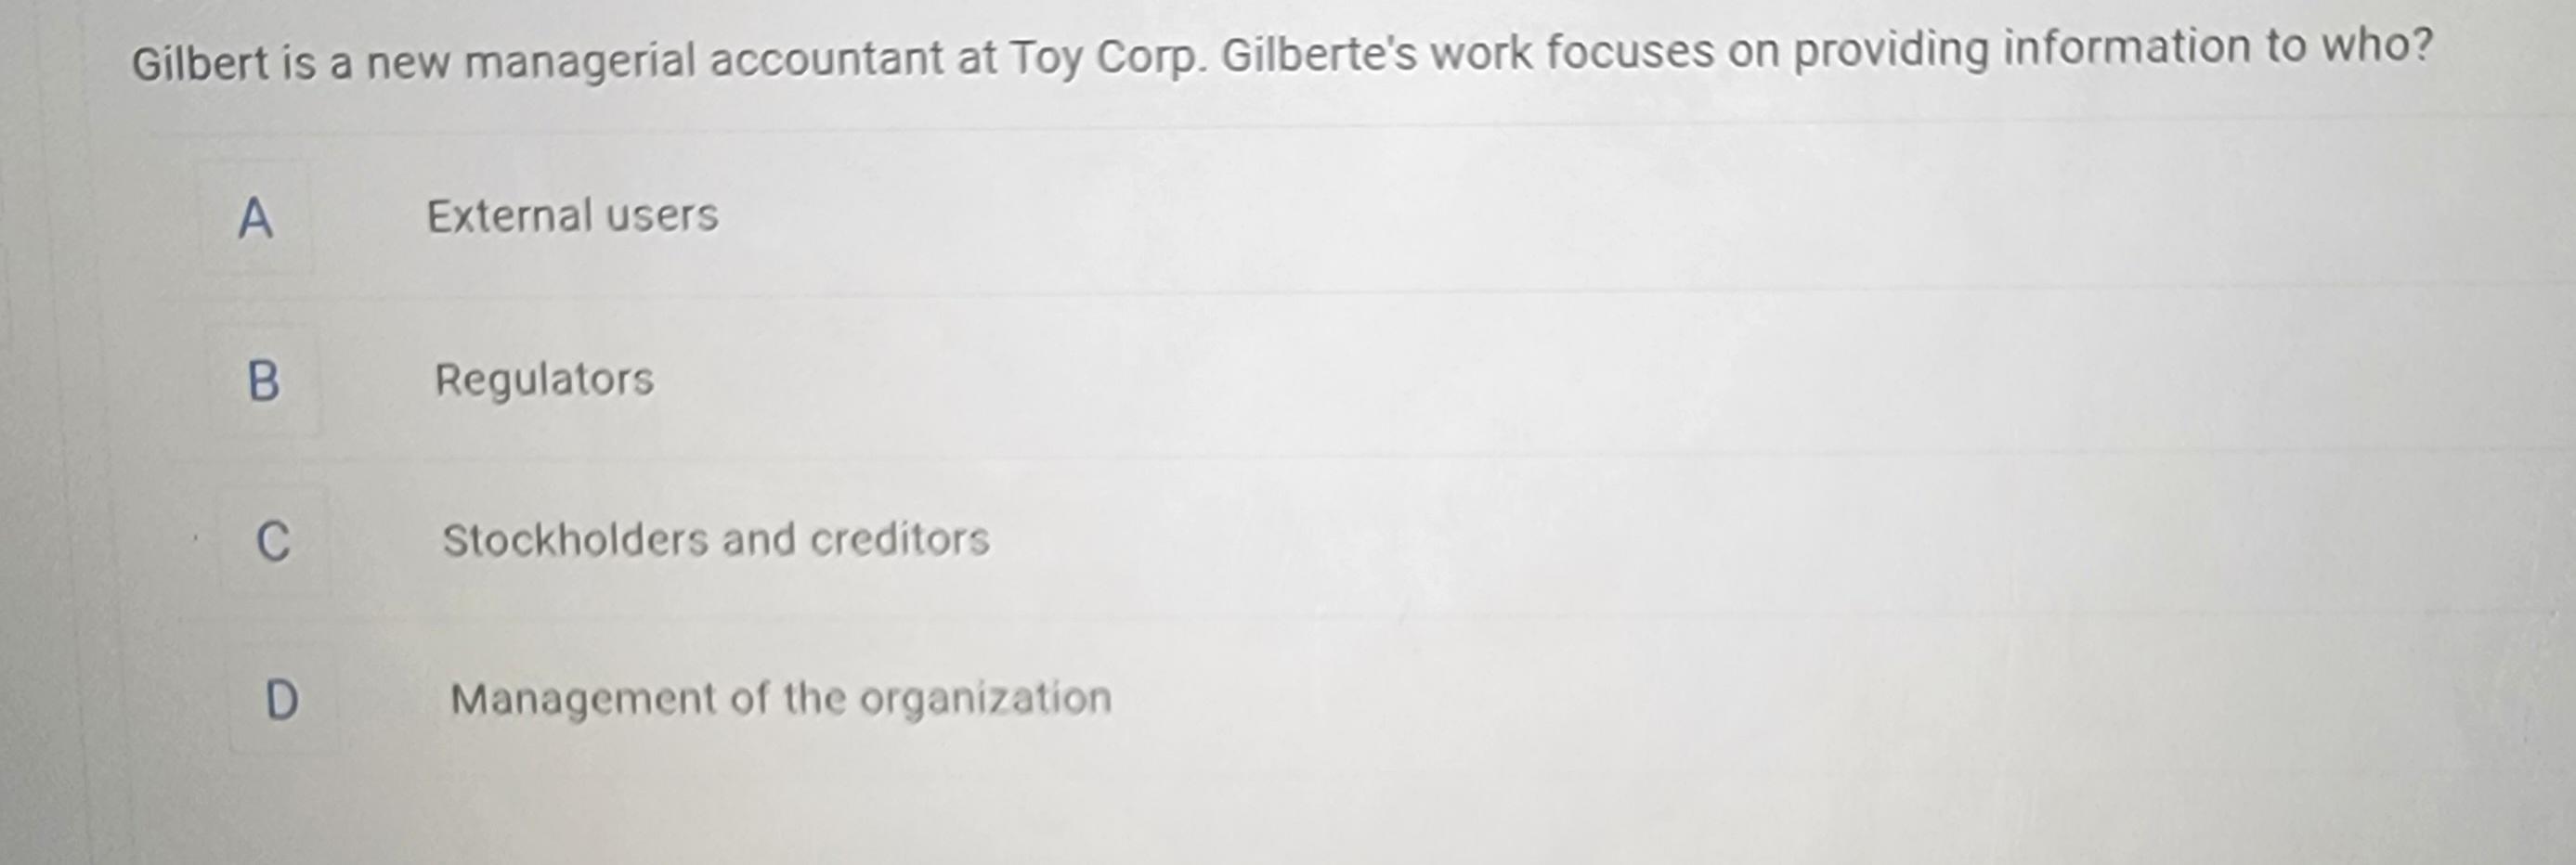 Gilbert is a new managerial accountant at Toy Corp. Gilberte's work focuses on providing information to who?